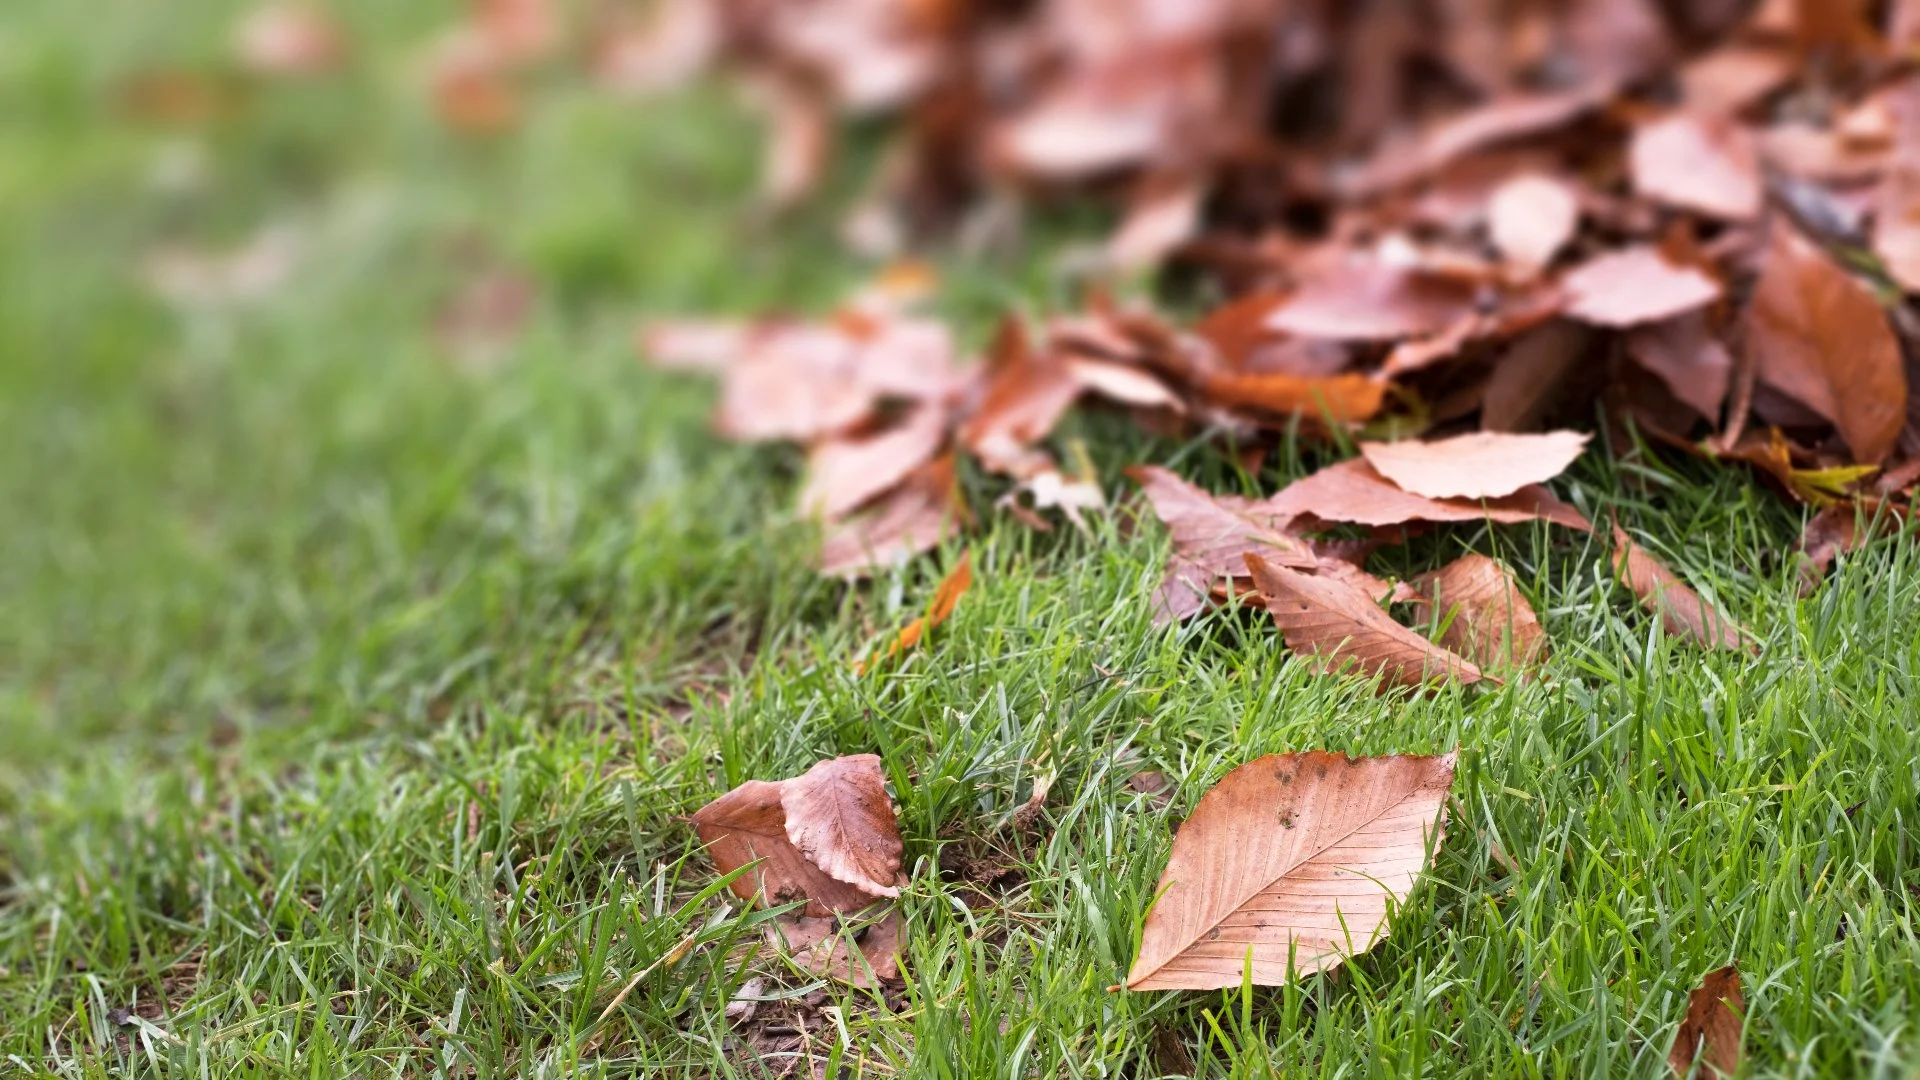 Is It Better to Continuously Clean up Leaves From Your Yard or All at Once?